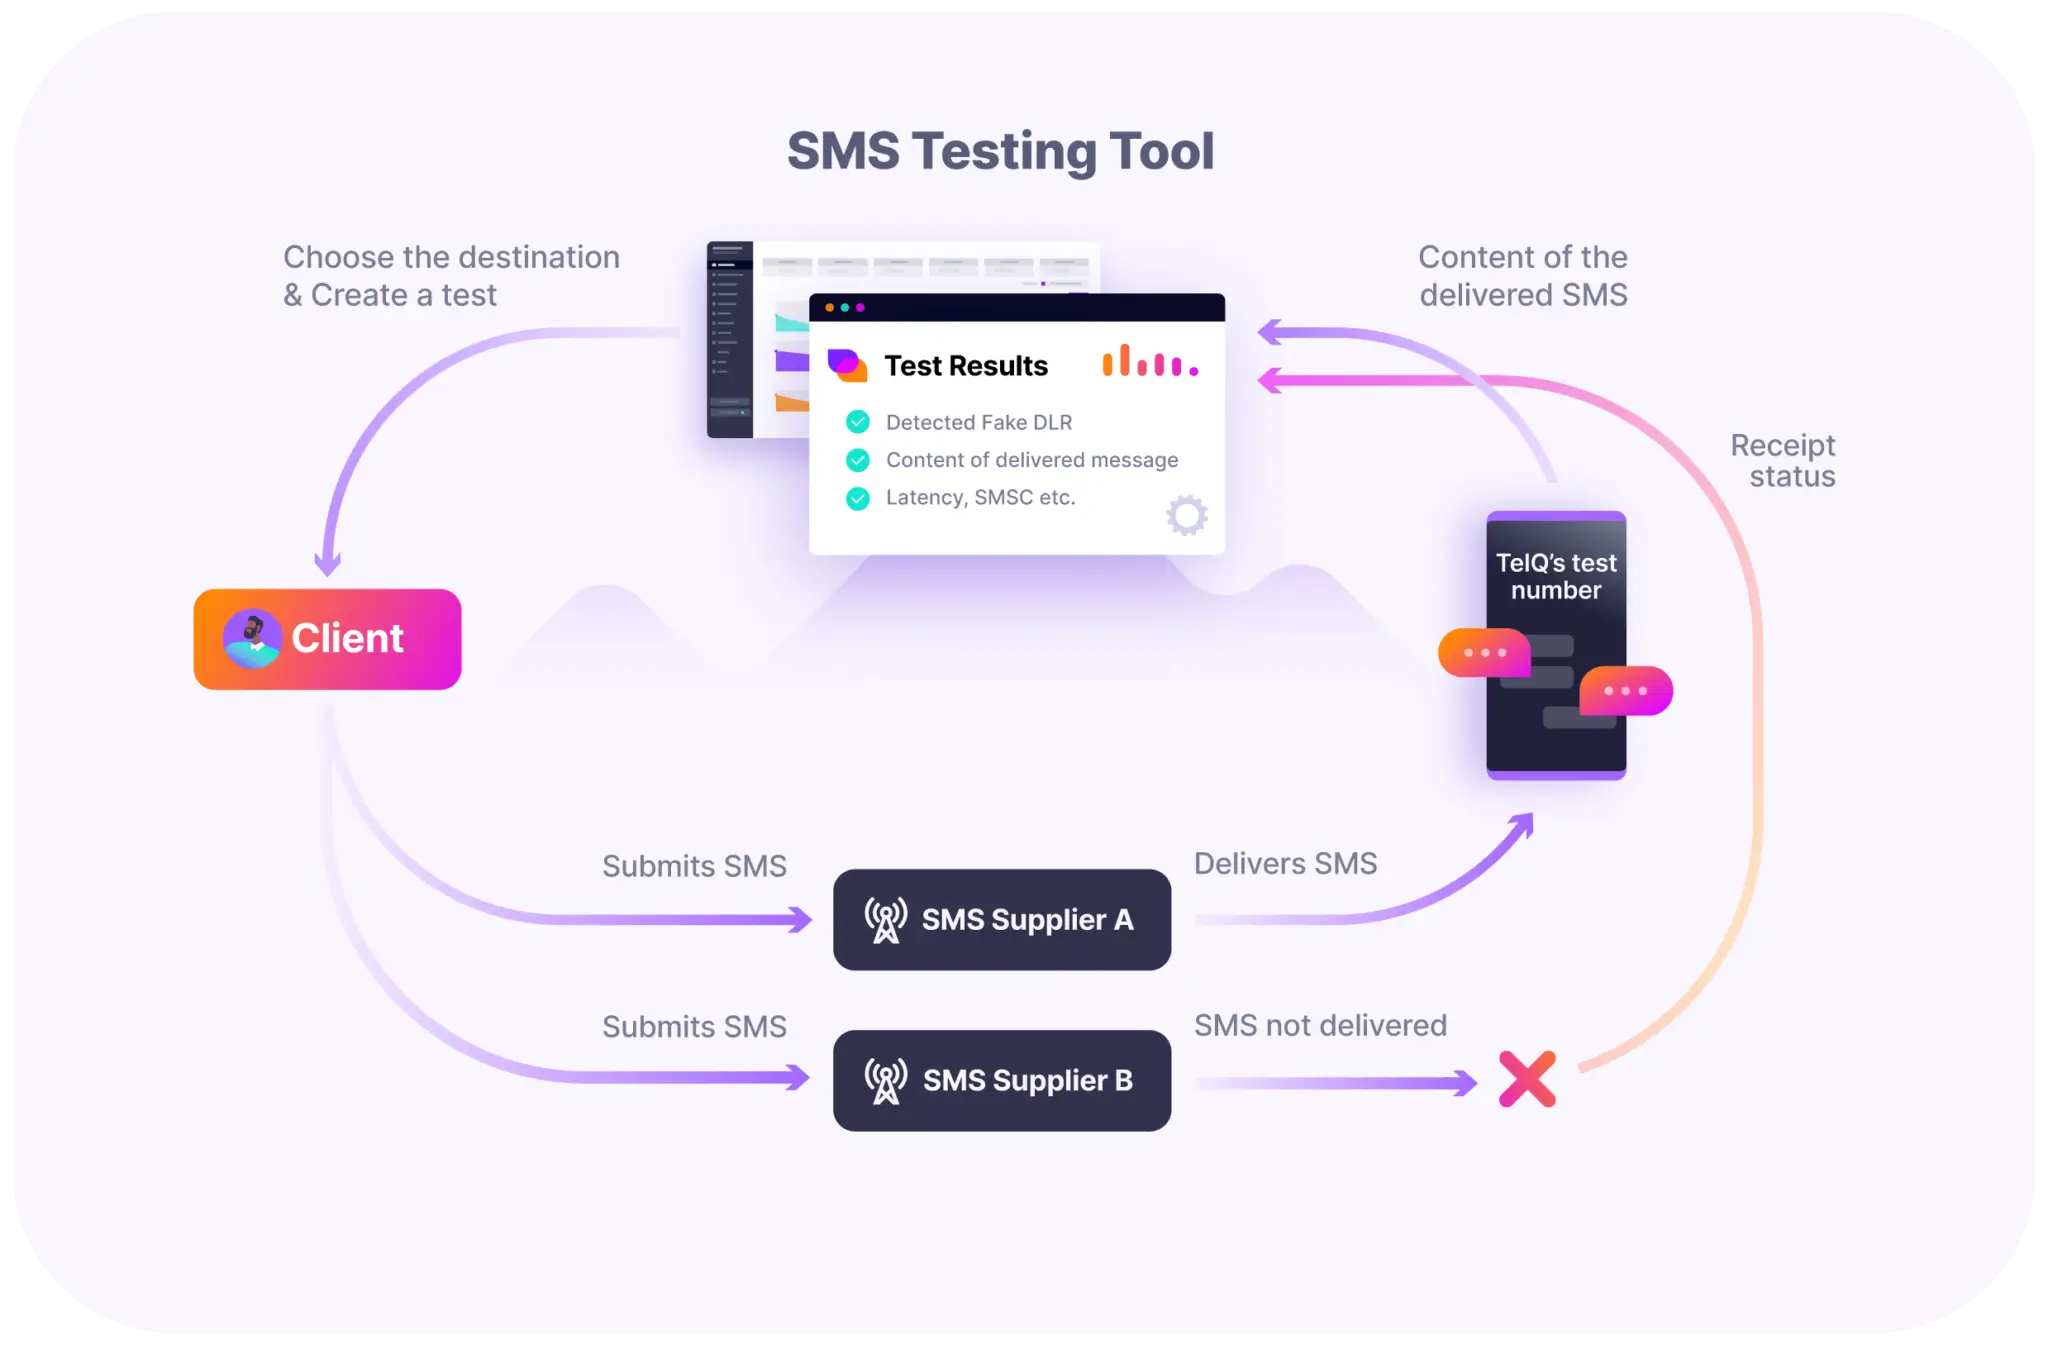 How TelQ testing tool works